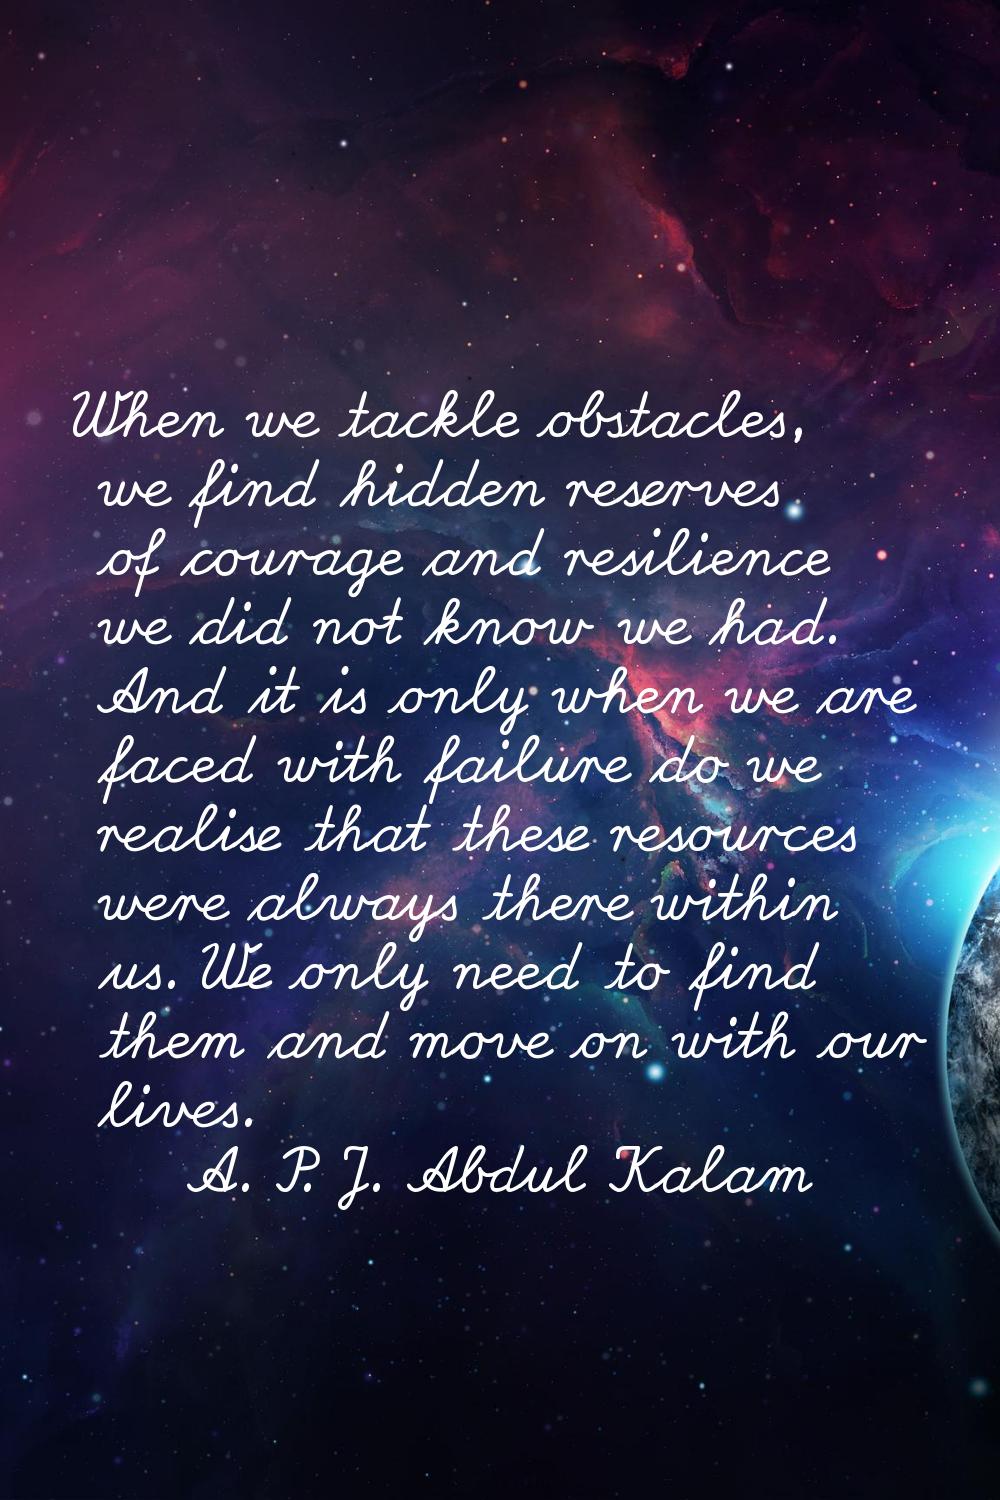 When we tackle obstacles, we find hidden reserves of courage and resilience we did not know we had.